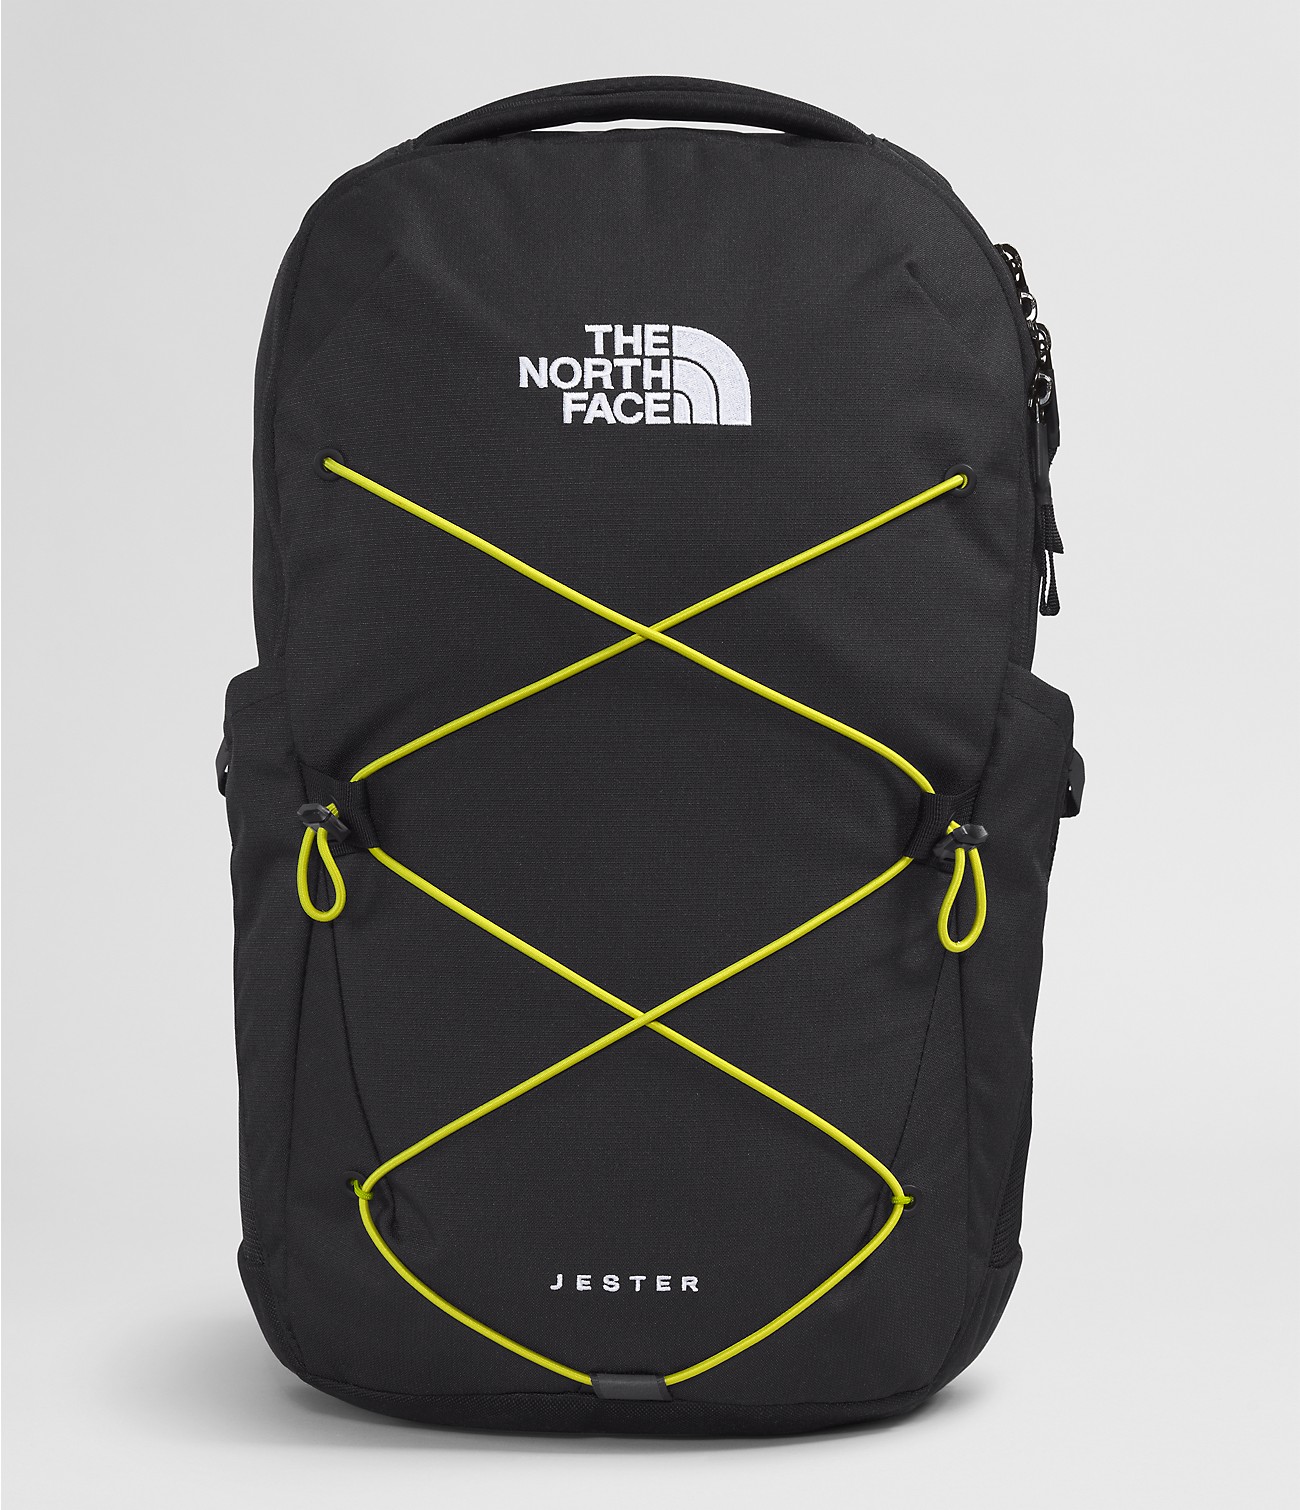 Unlock Wilderness' choice in the North Face Vs JanSport comparison, the Jester Backpack by The North Face